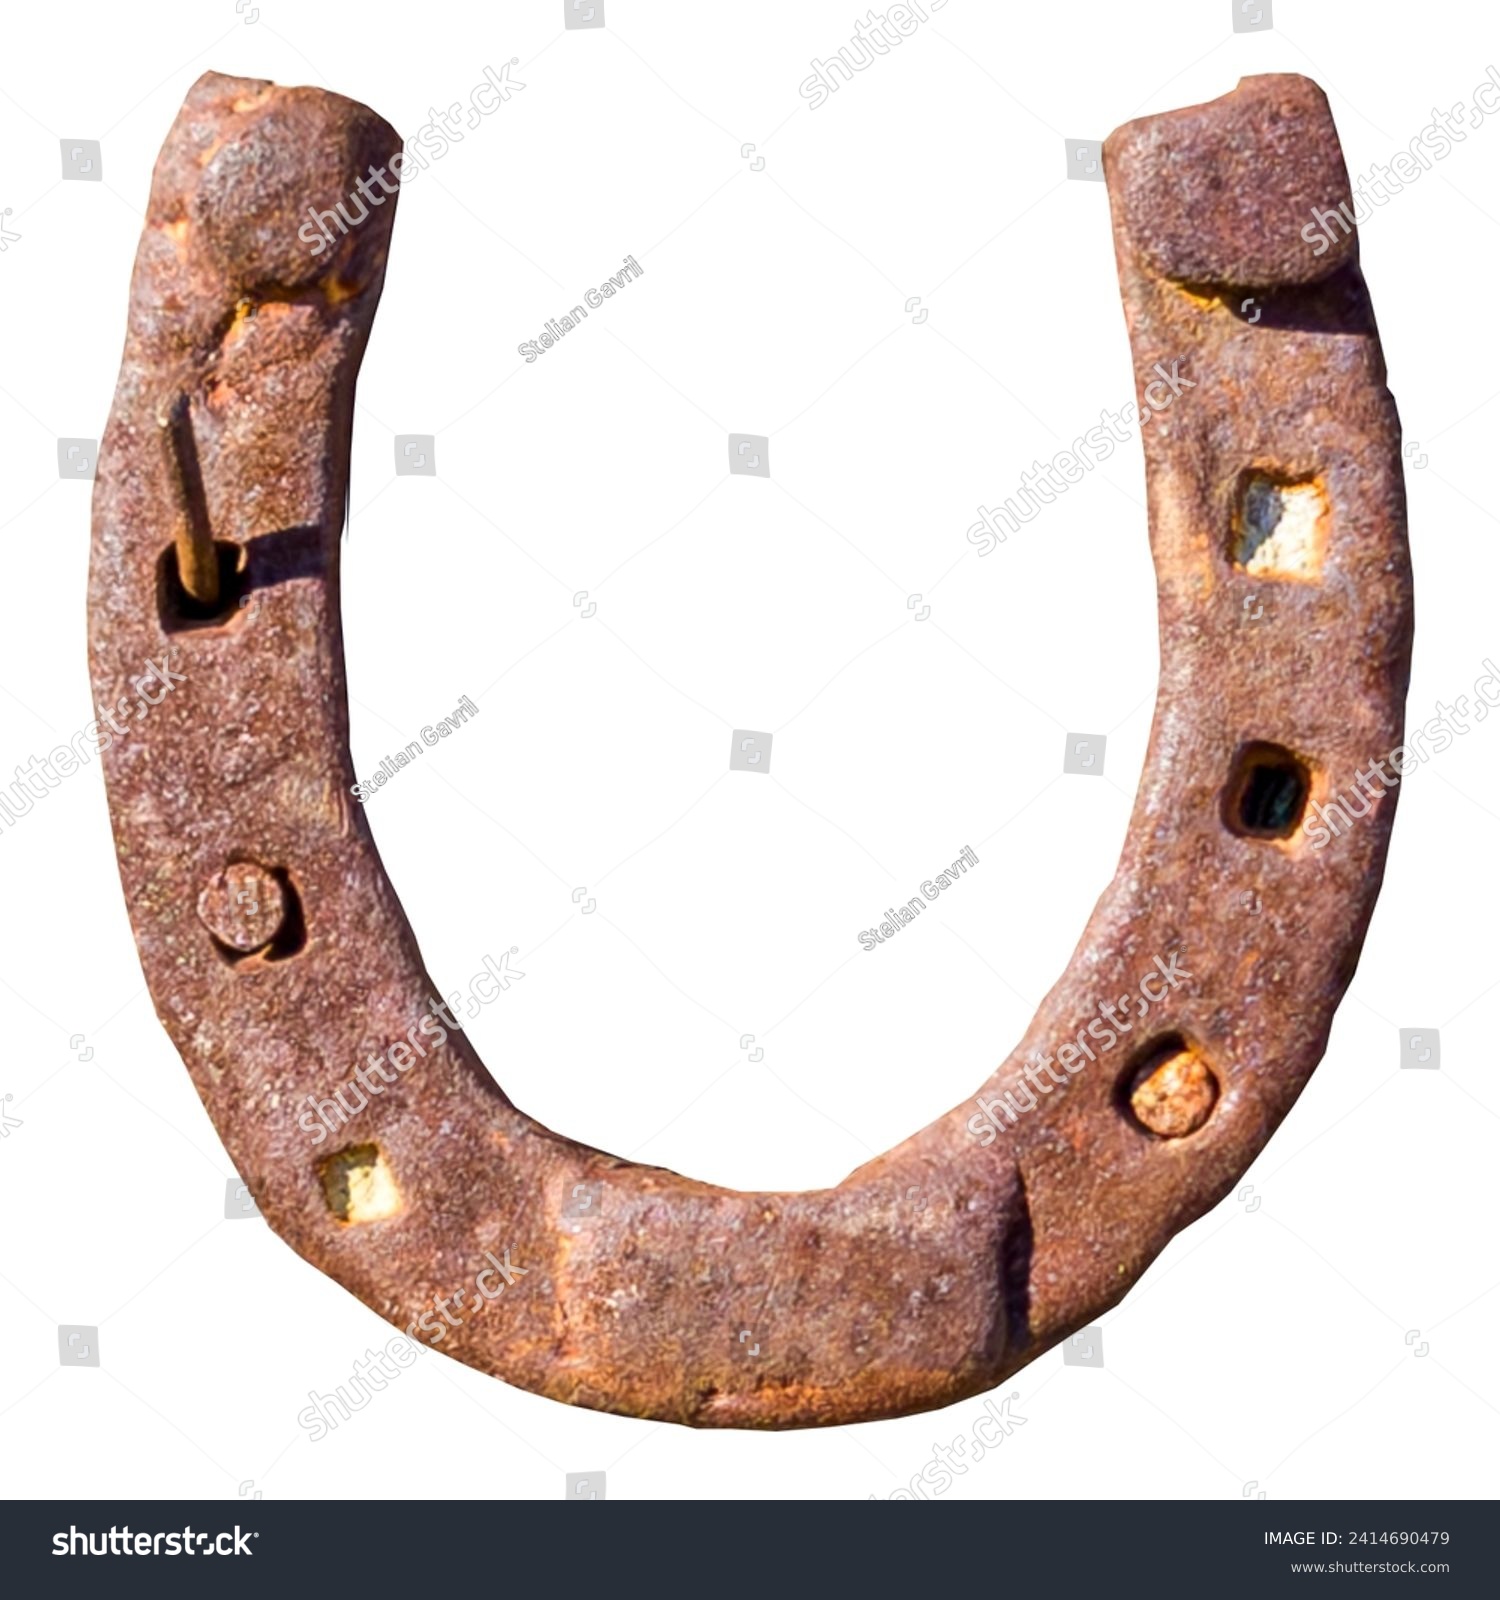 An old, rusted horseshoe on a white background, symbol of luck. The rust gives the object a nostalgic patina, while the white background accentuates the simplicity and elegance of the lucky symbol. #2414690479